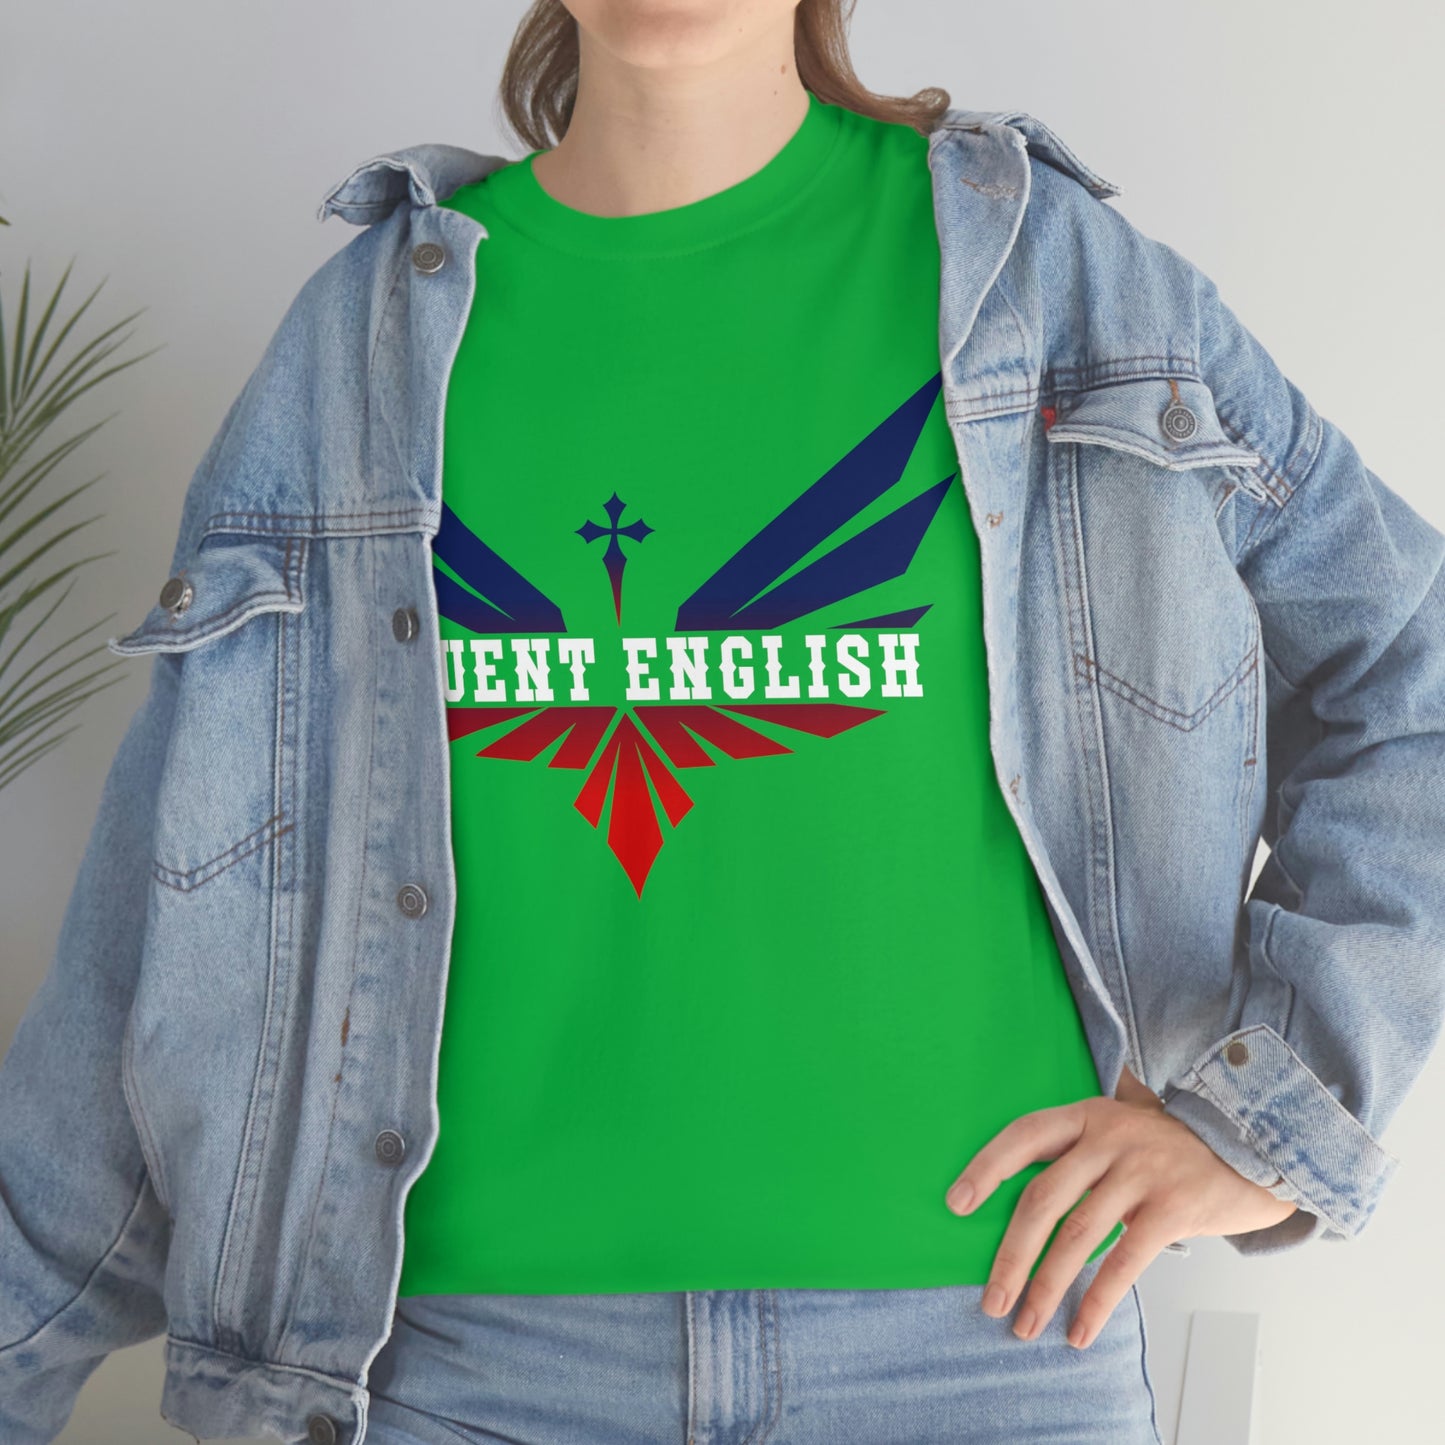 Fluent English 4 xl and 5 xl in patriot color  design MULTI SHIRT COLOR CHOICES